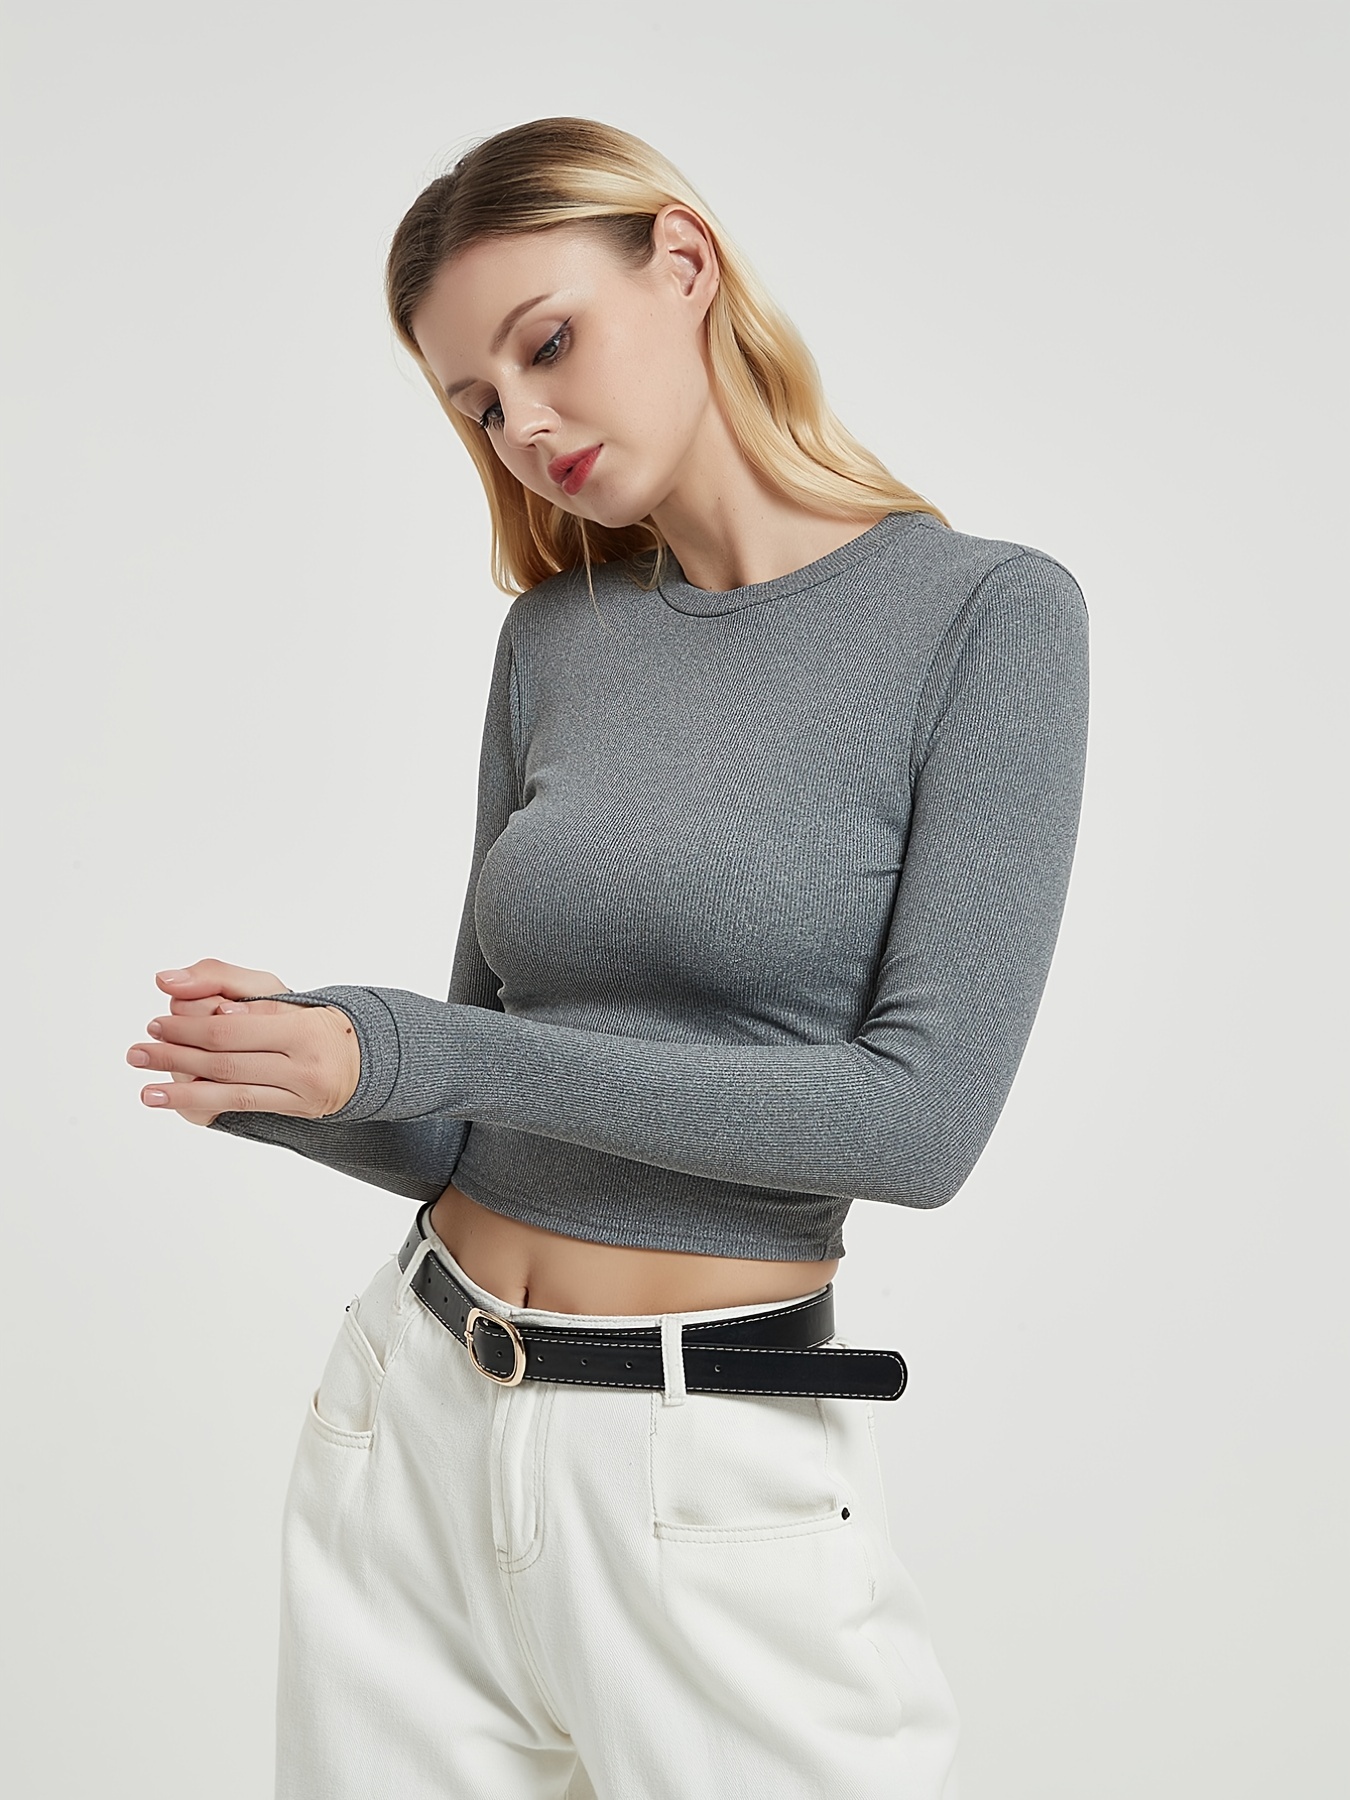 Women's Long Sleeve Ribbed Fitted Crew Neck Basic Short Crop